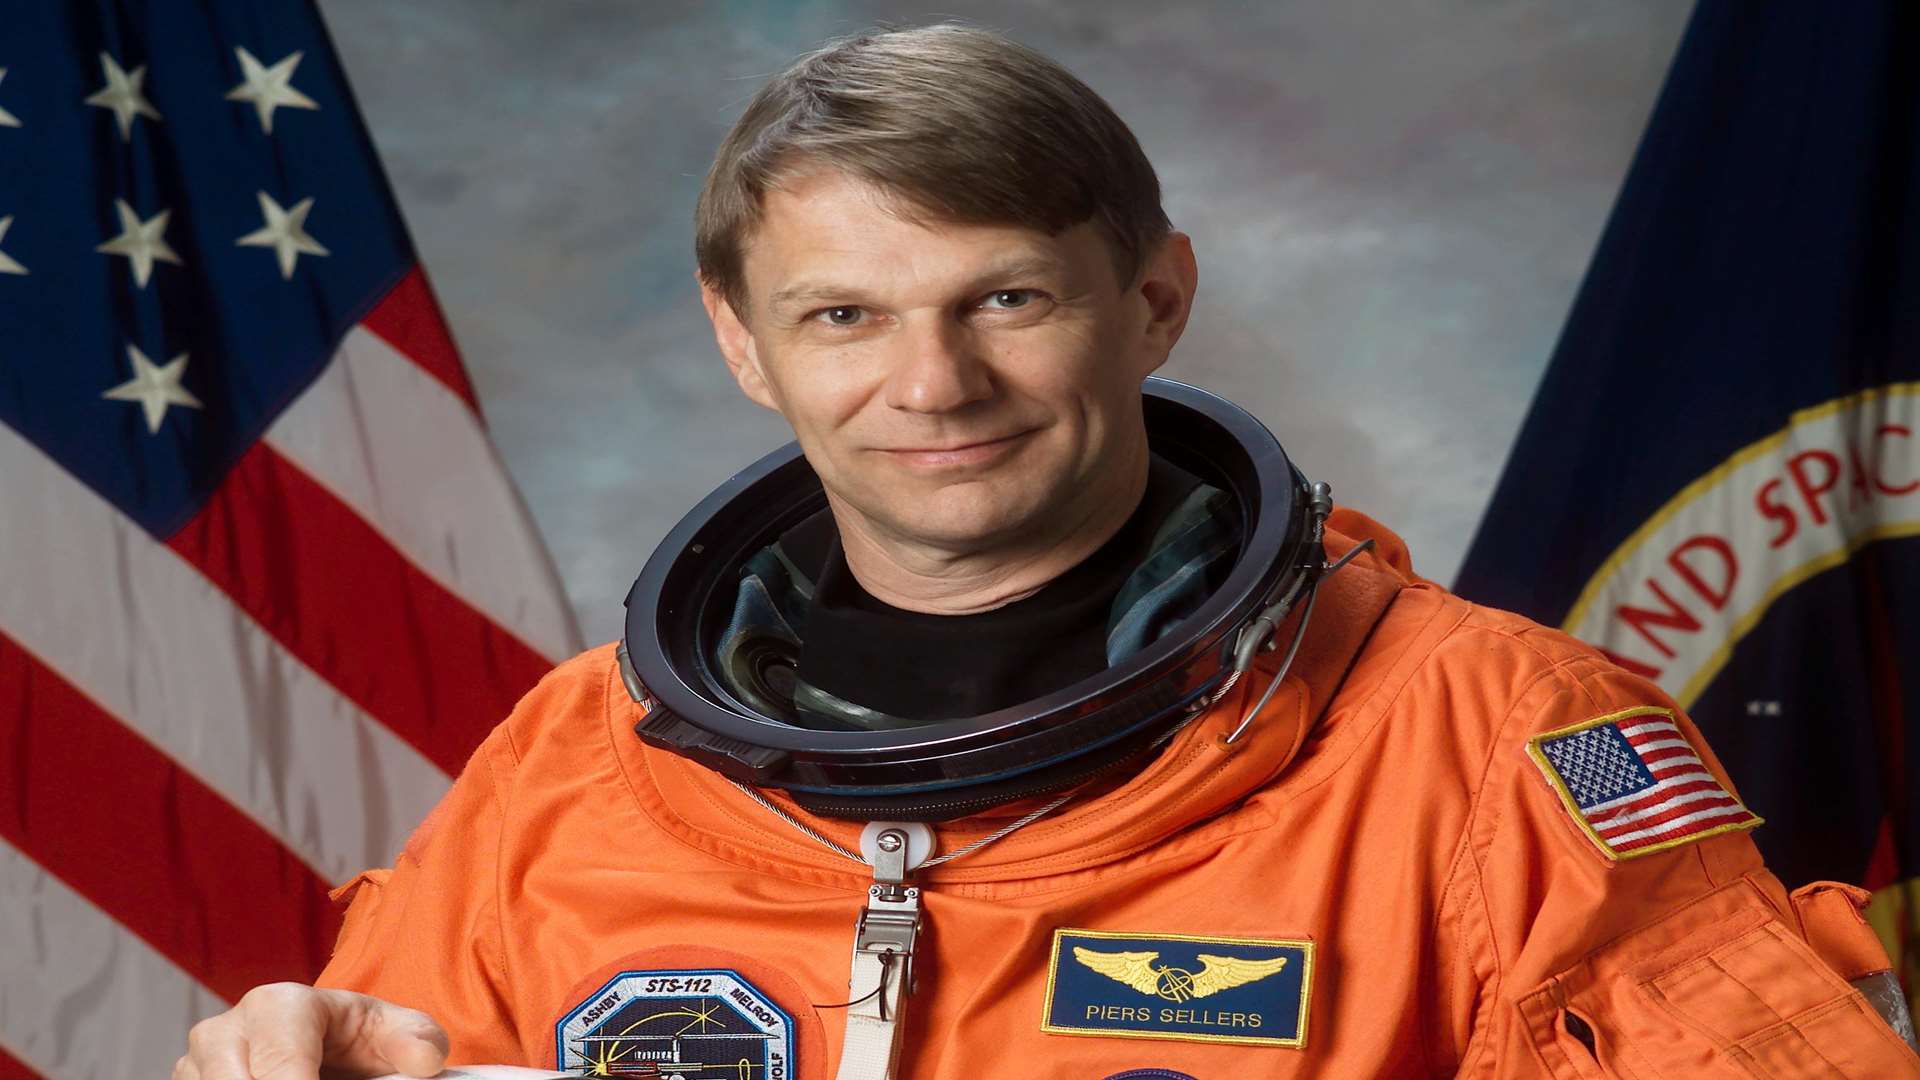 Mission specialist Piers Sellers. Credit: NASA